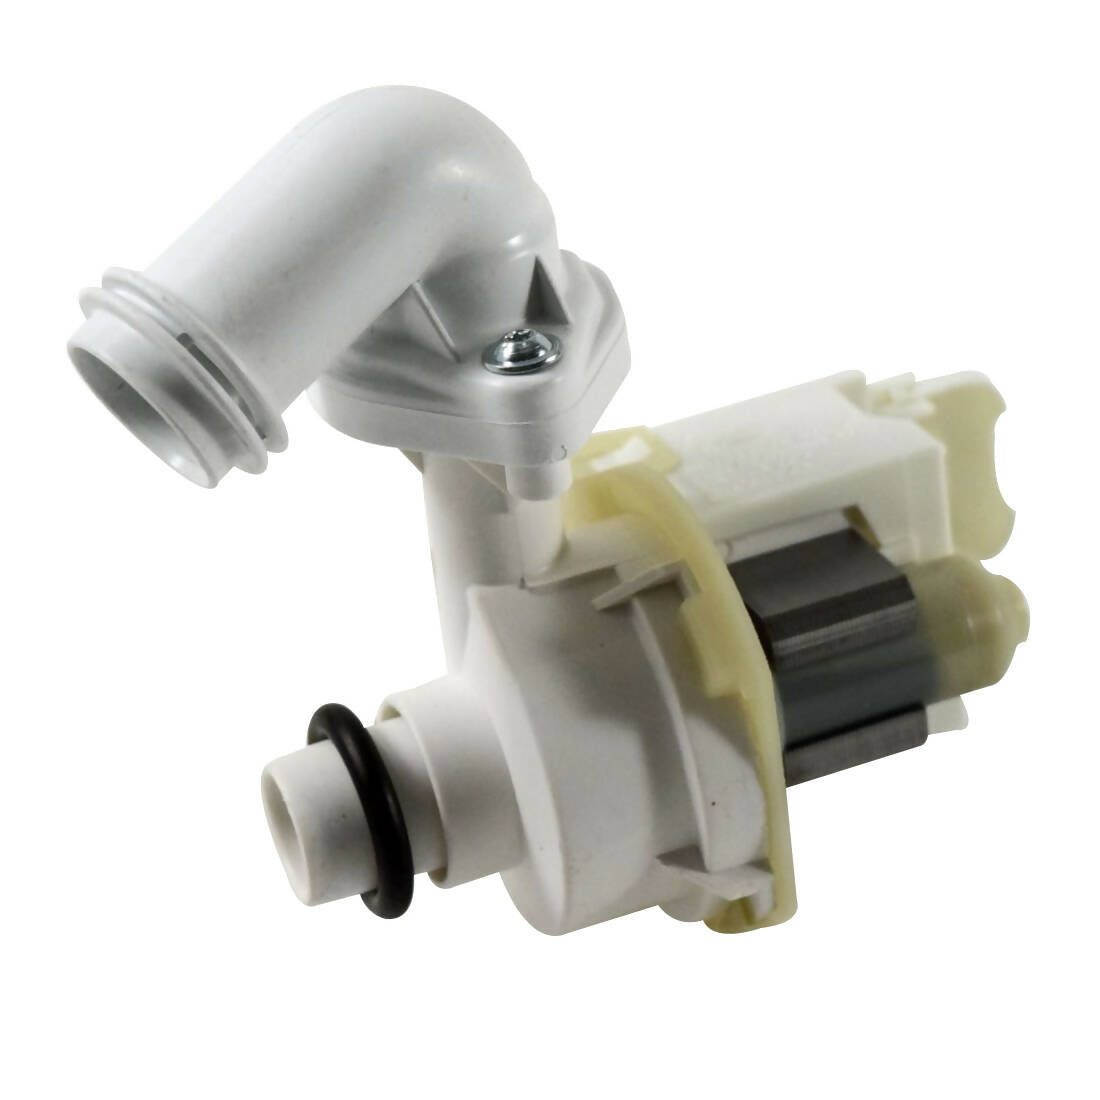 Drain Pump Assembly - 00261687, Replaces: PD00050542 00092196 092196 92196 261687 OEM PARTS WORLD